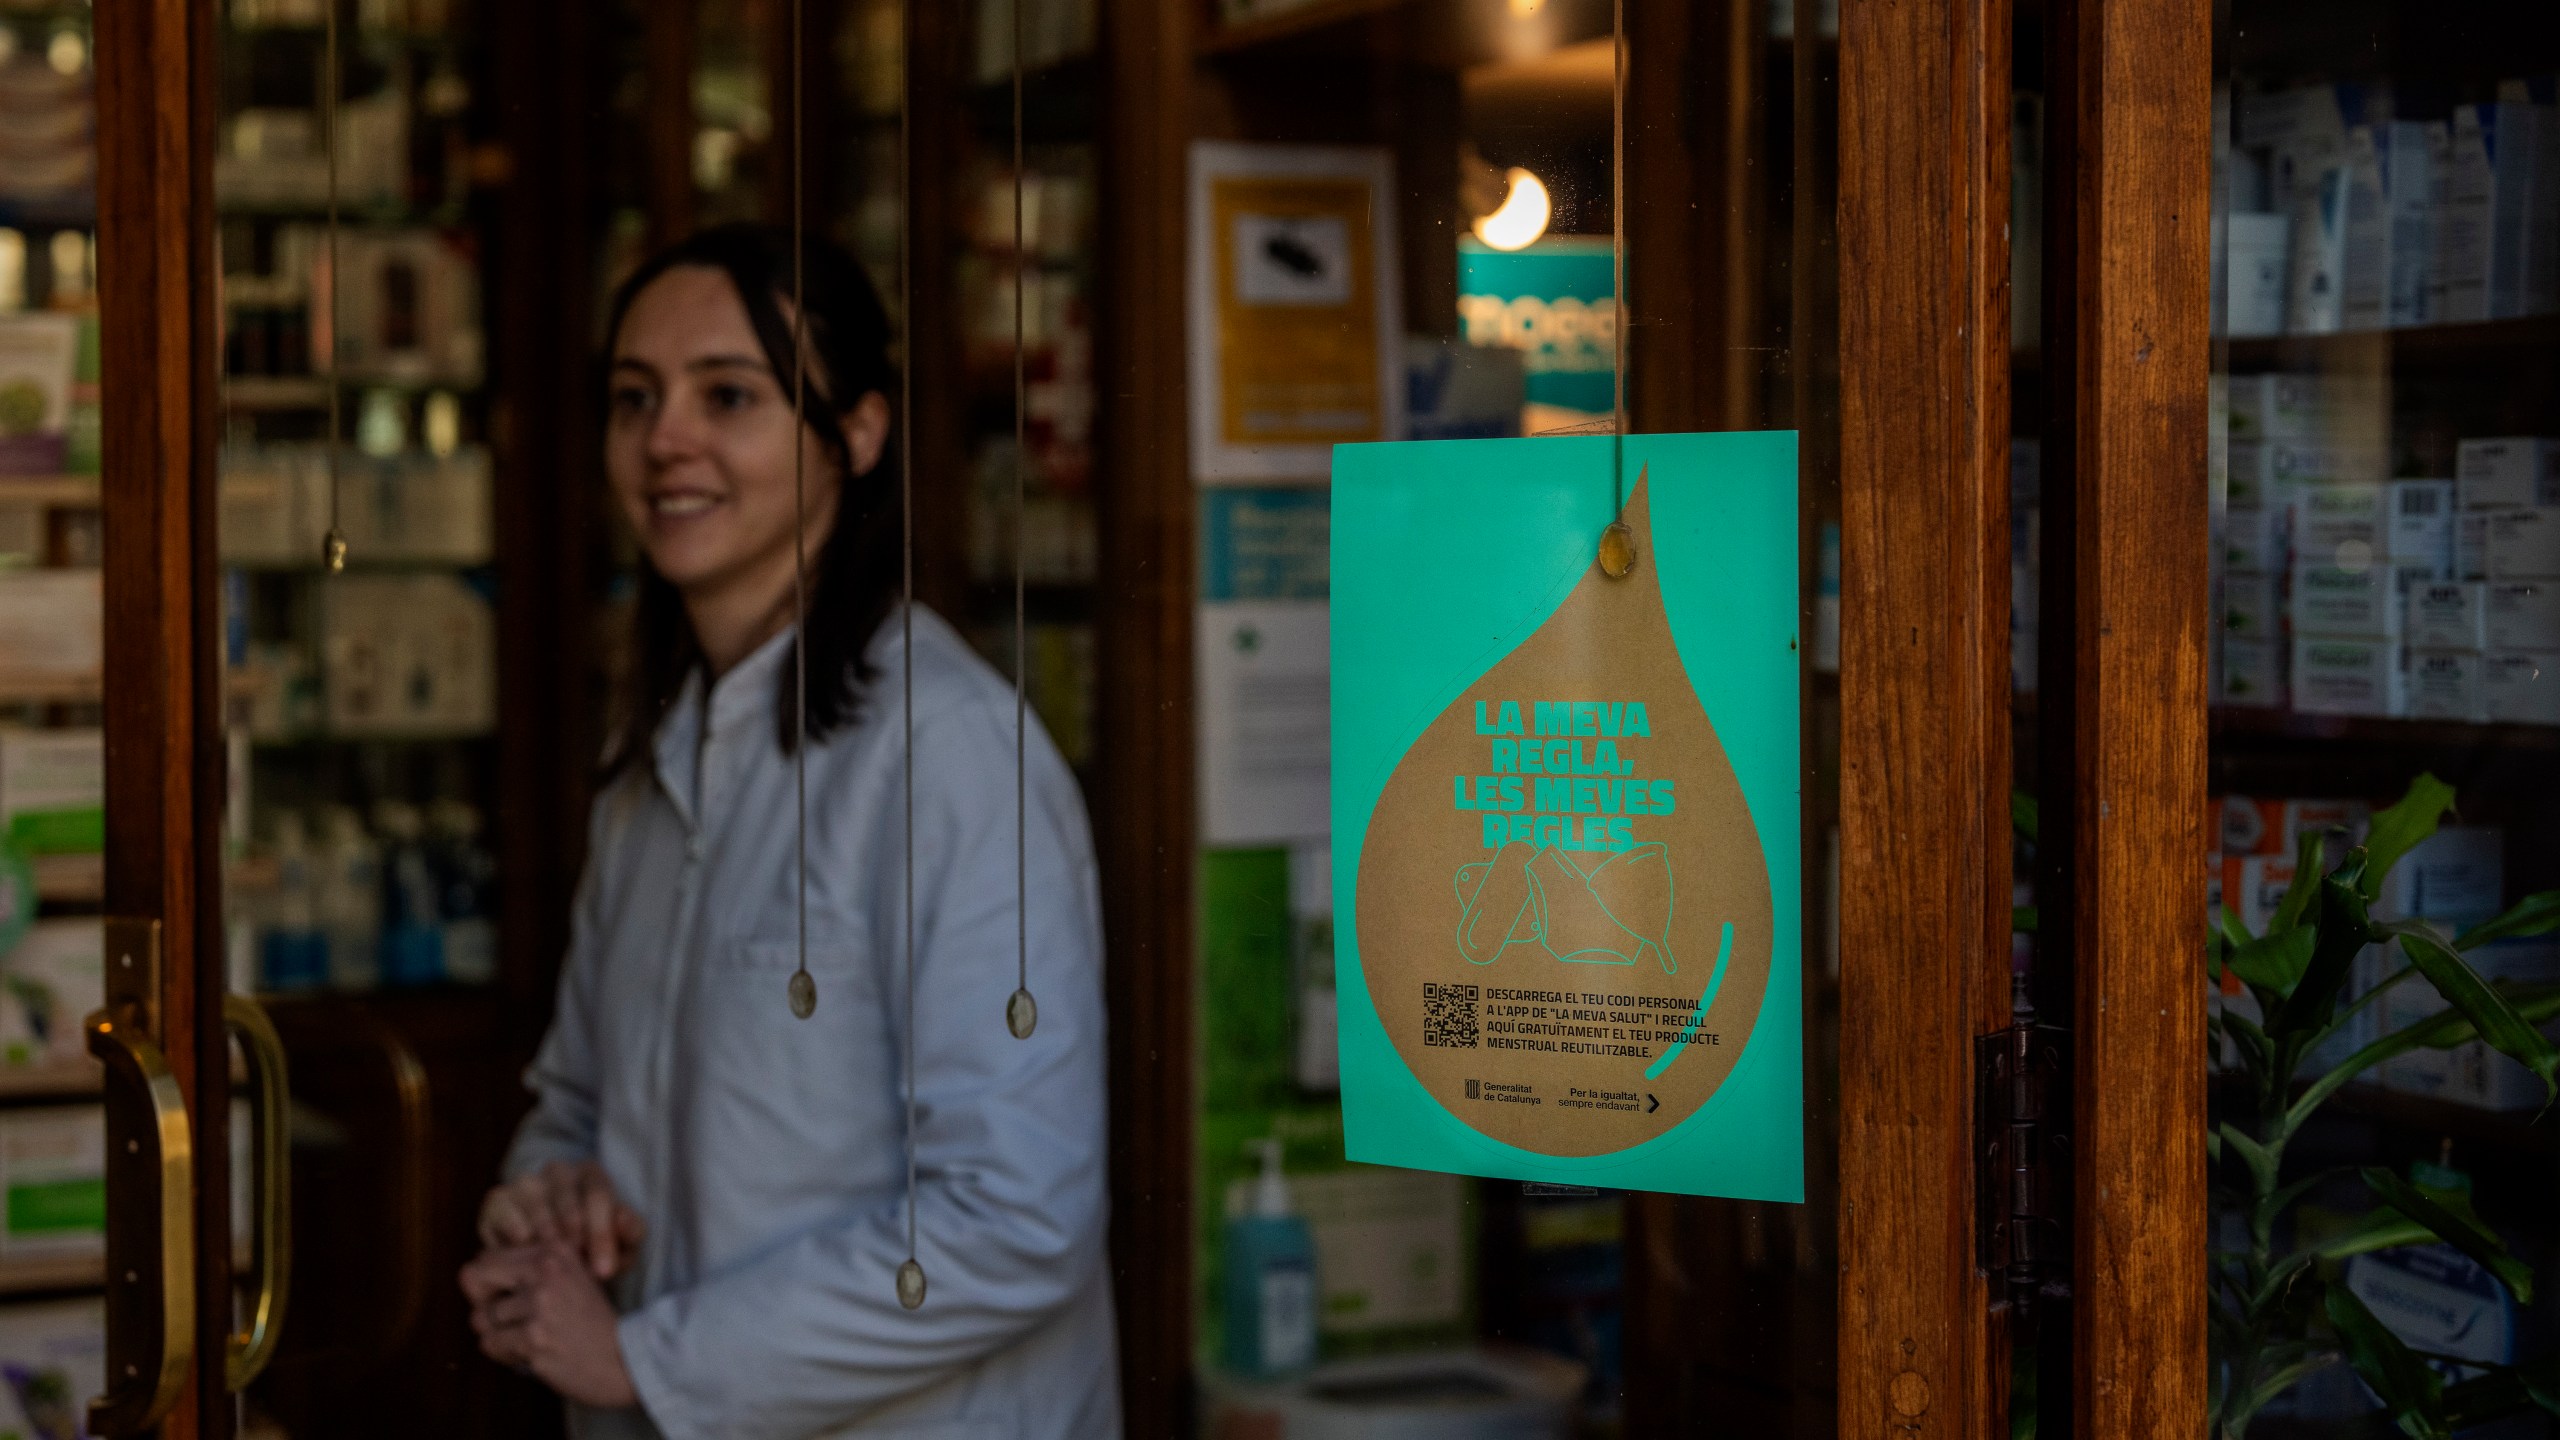 A pharmacist waits for customers next to windows where an advertisement for the new campaign of the Catalan government where you can read "my period, my rules" has been placed, inside a pharmacy in Barcelona, Spain, Tuesday, March 5, 2024. Spain's Catalonia region rolled out this week a pioneering women's health initiative that offers millions of women reusable menstruation products for free. Some 2.5 million women in northeast Spain can receive one menstrual cup, one pair of underwear for periods, and two packages of cloth pads at local pharmacies free of charge. (AP Photo/Emilio Morenatti)